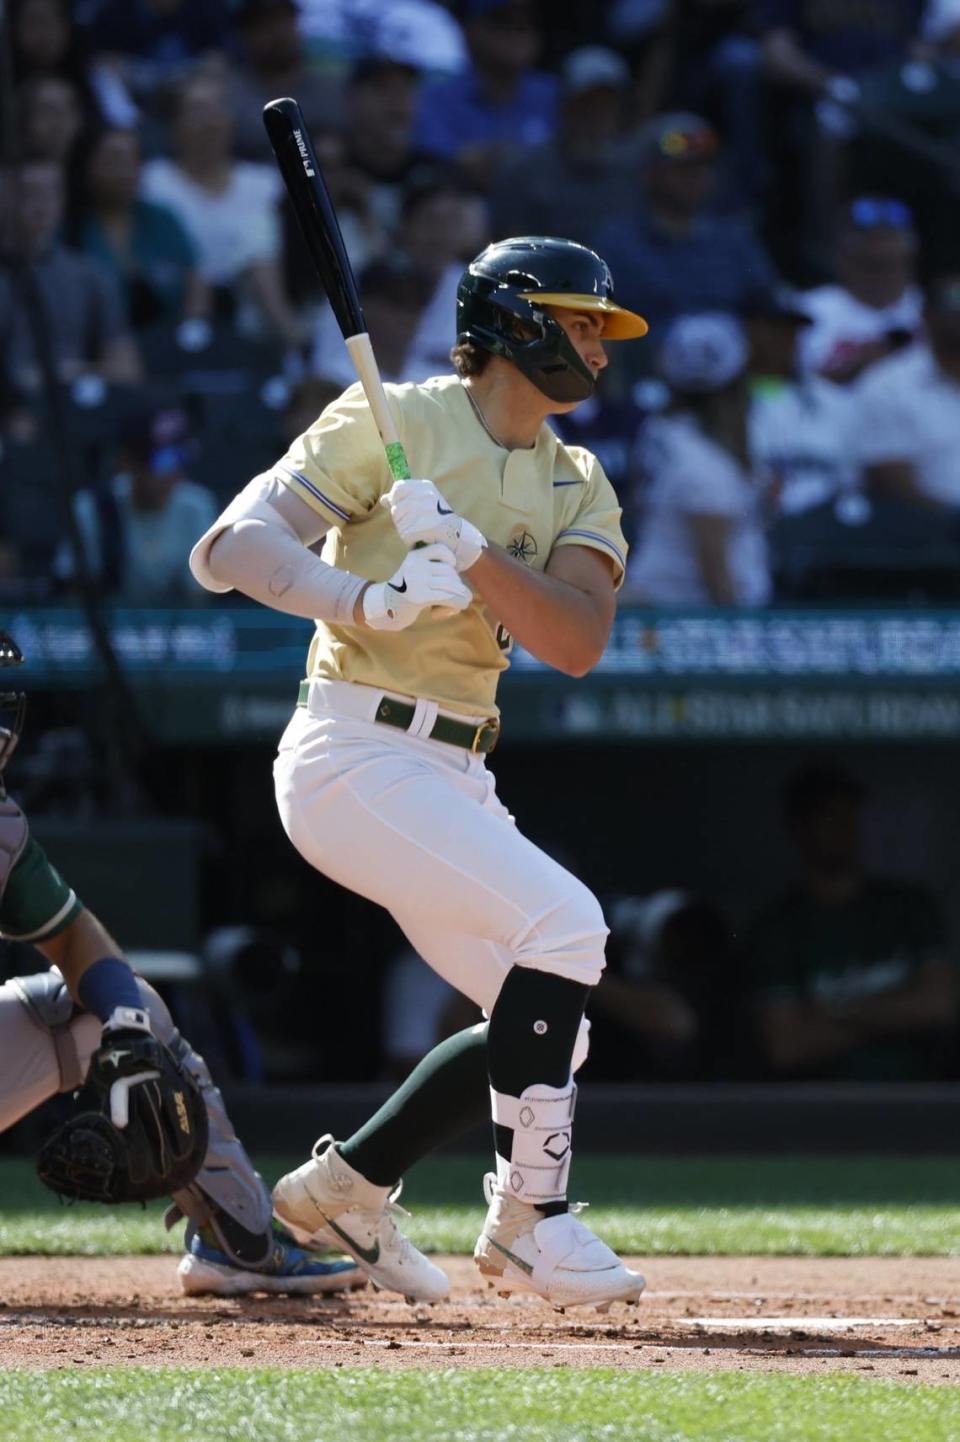 American League Futures first baseman Tyler Soderstrom (21) of the Oakland Athletics hits a single against the National League Futures during the second inning of the All Star-Futures Game at T-Mobile Park in Seattle, Washington, July 8, 2023.